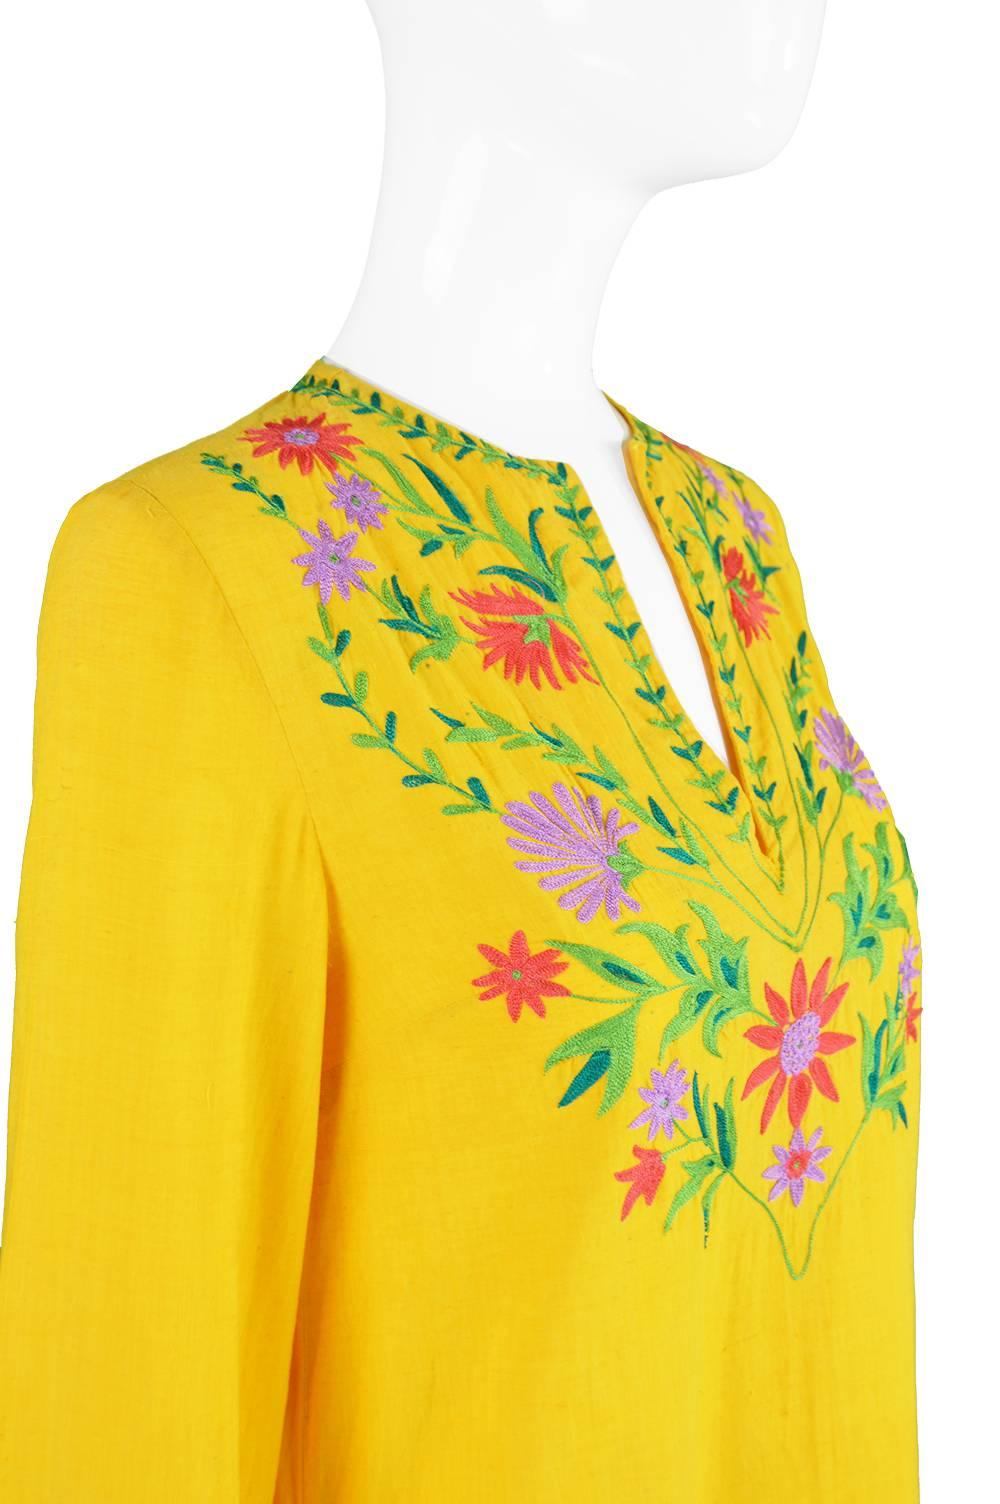 Treacy Lowe Mustard Yellow Hand Embroidered Indian Cotton Mini Dress, 1970s For Sale 3